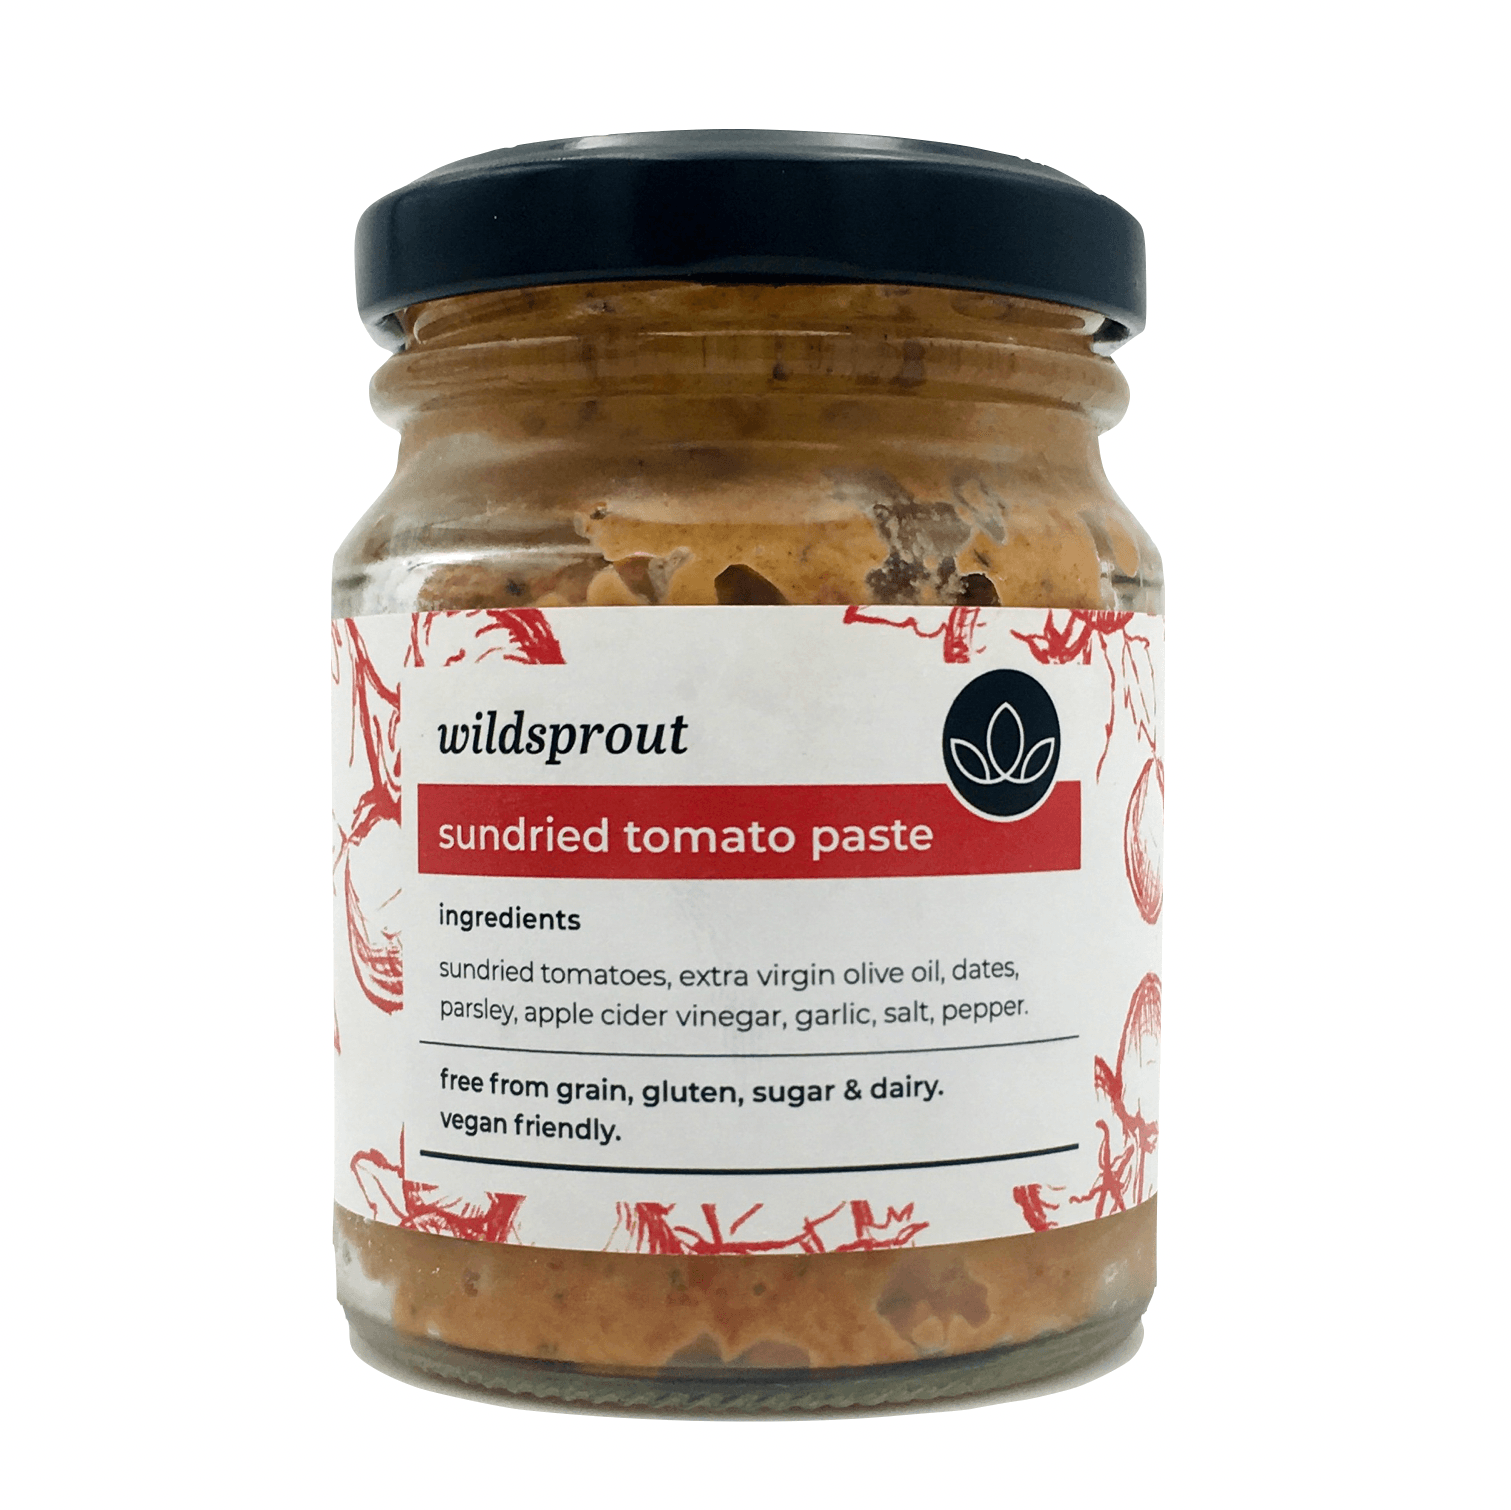 Sundried Tomato Paste - Wildsprout